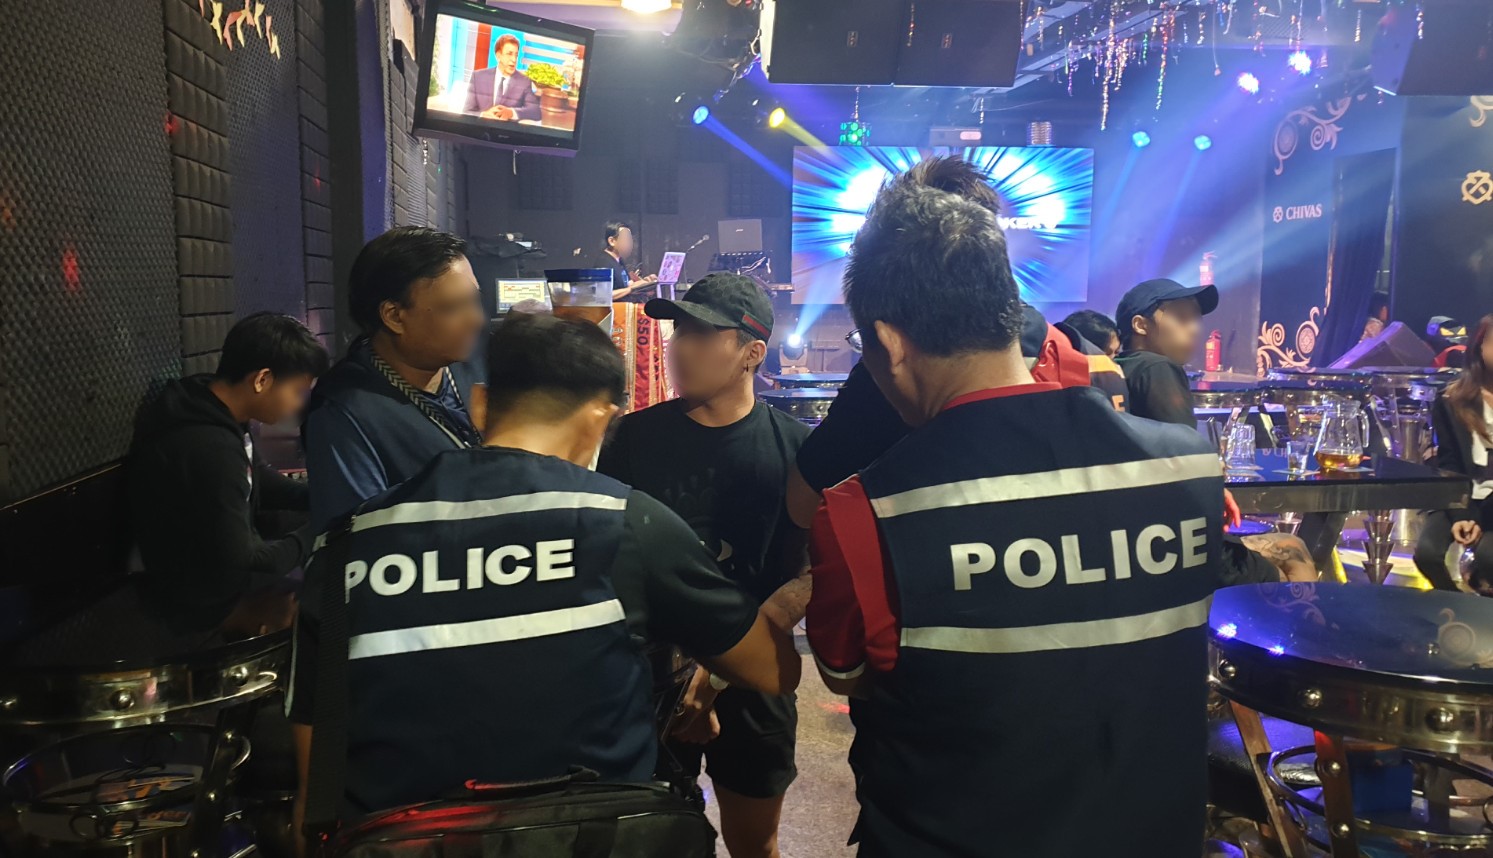 20190703_ARREST_261_HAULED_UP_IN_MULTI_AGENCY_OPERATION_LED_BY_BEDOK_POLICE_DIVISION_G_2